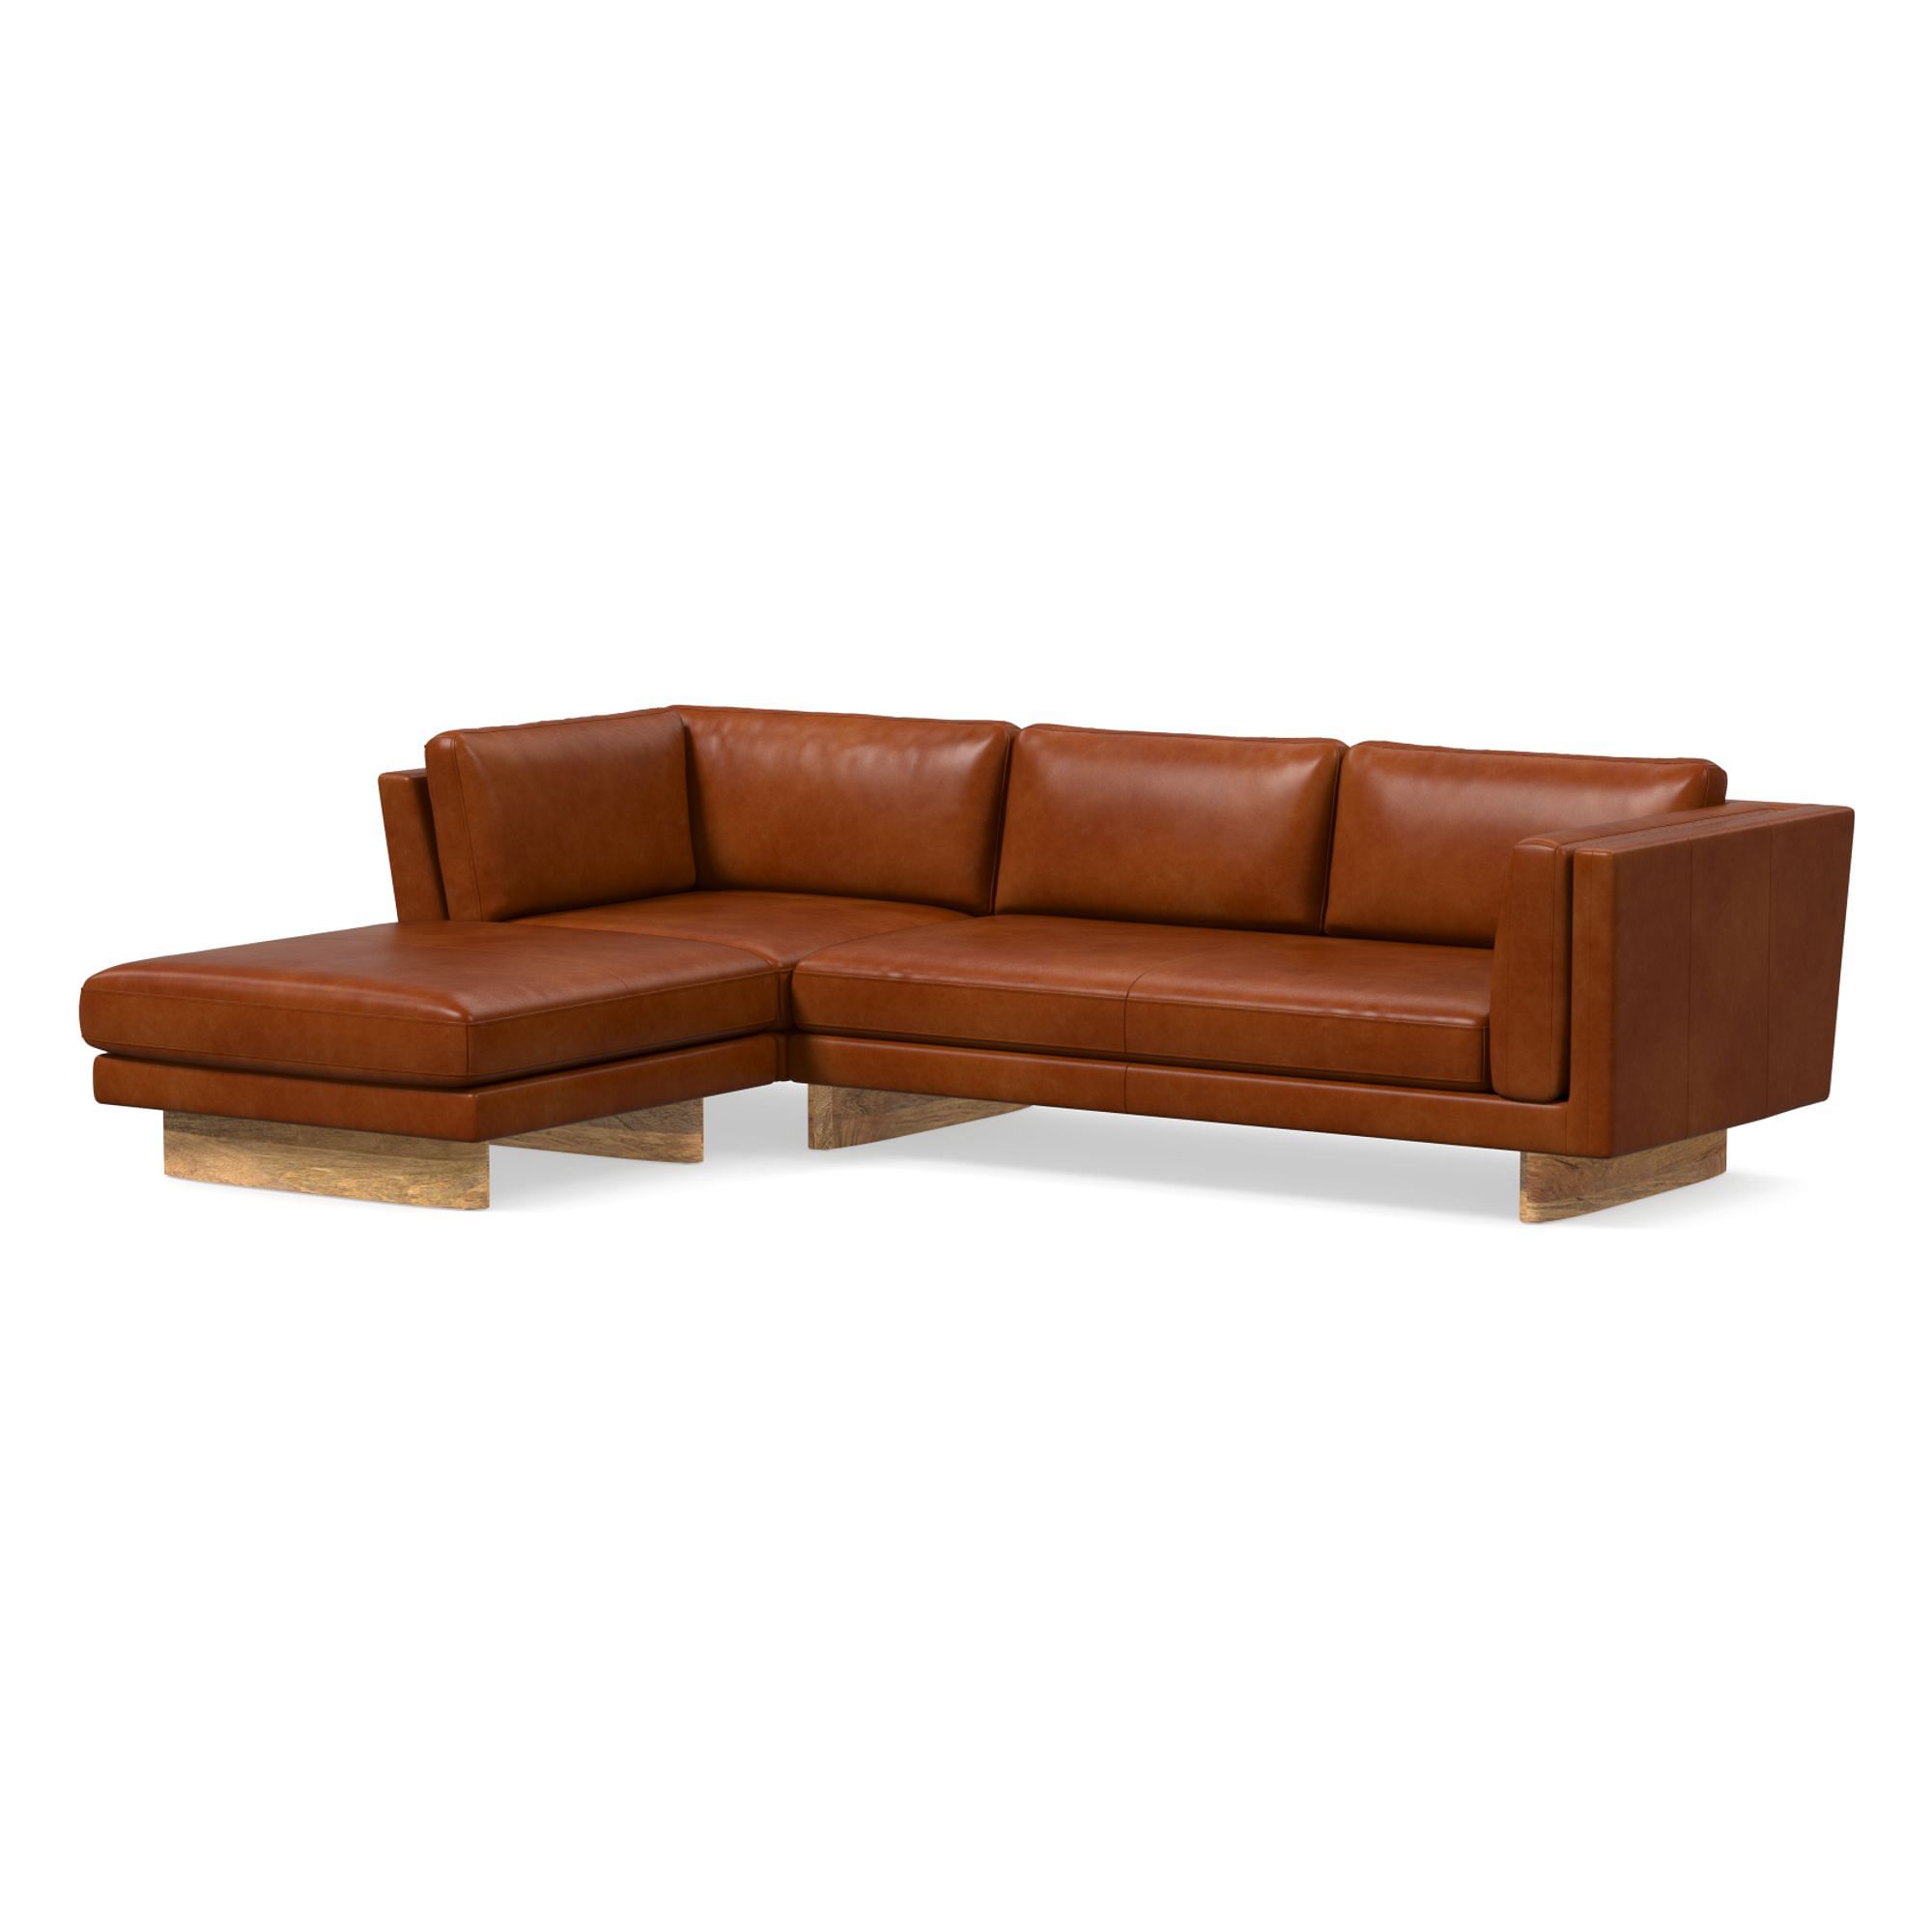 Anton Leather Piece Chaise Sectional Wood Legs | Sofa With West Elm